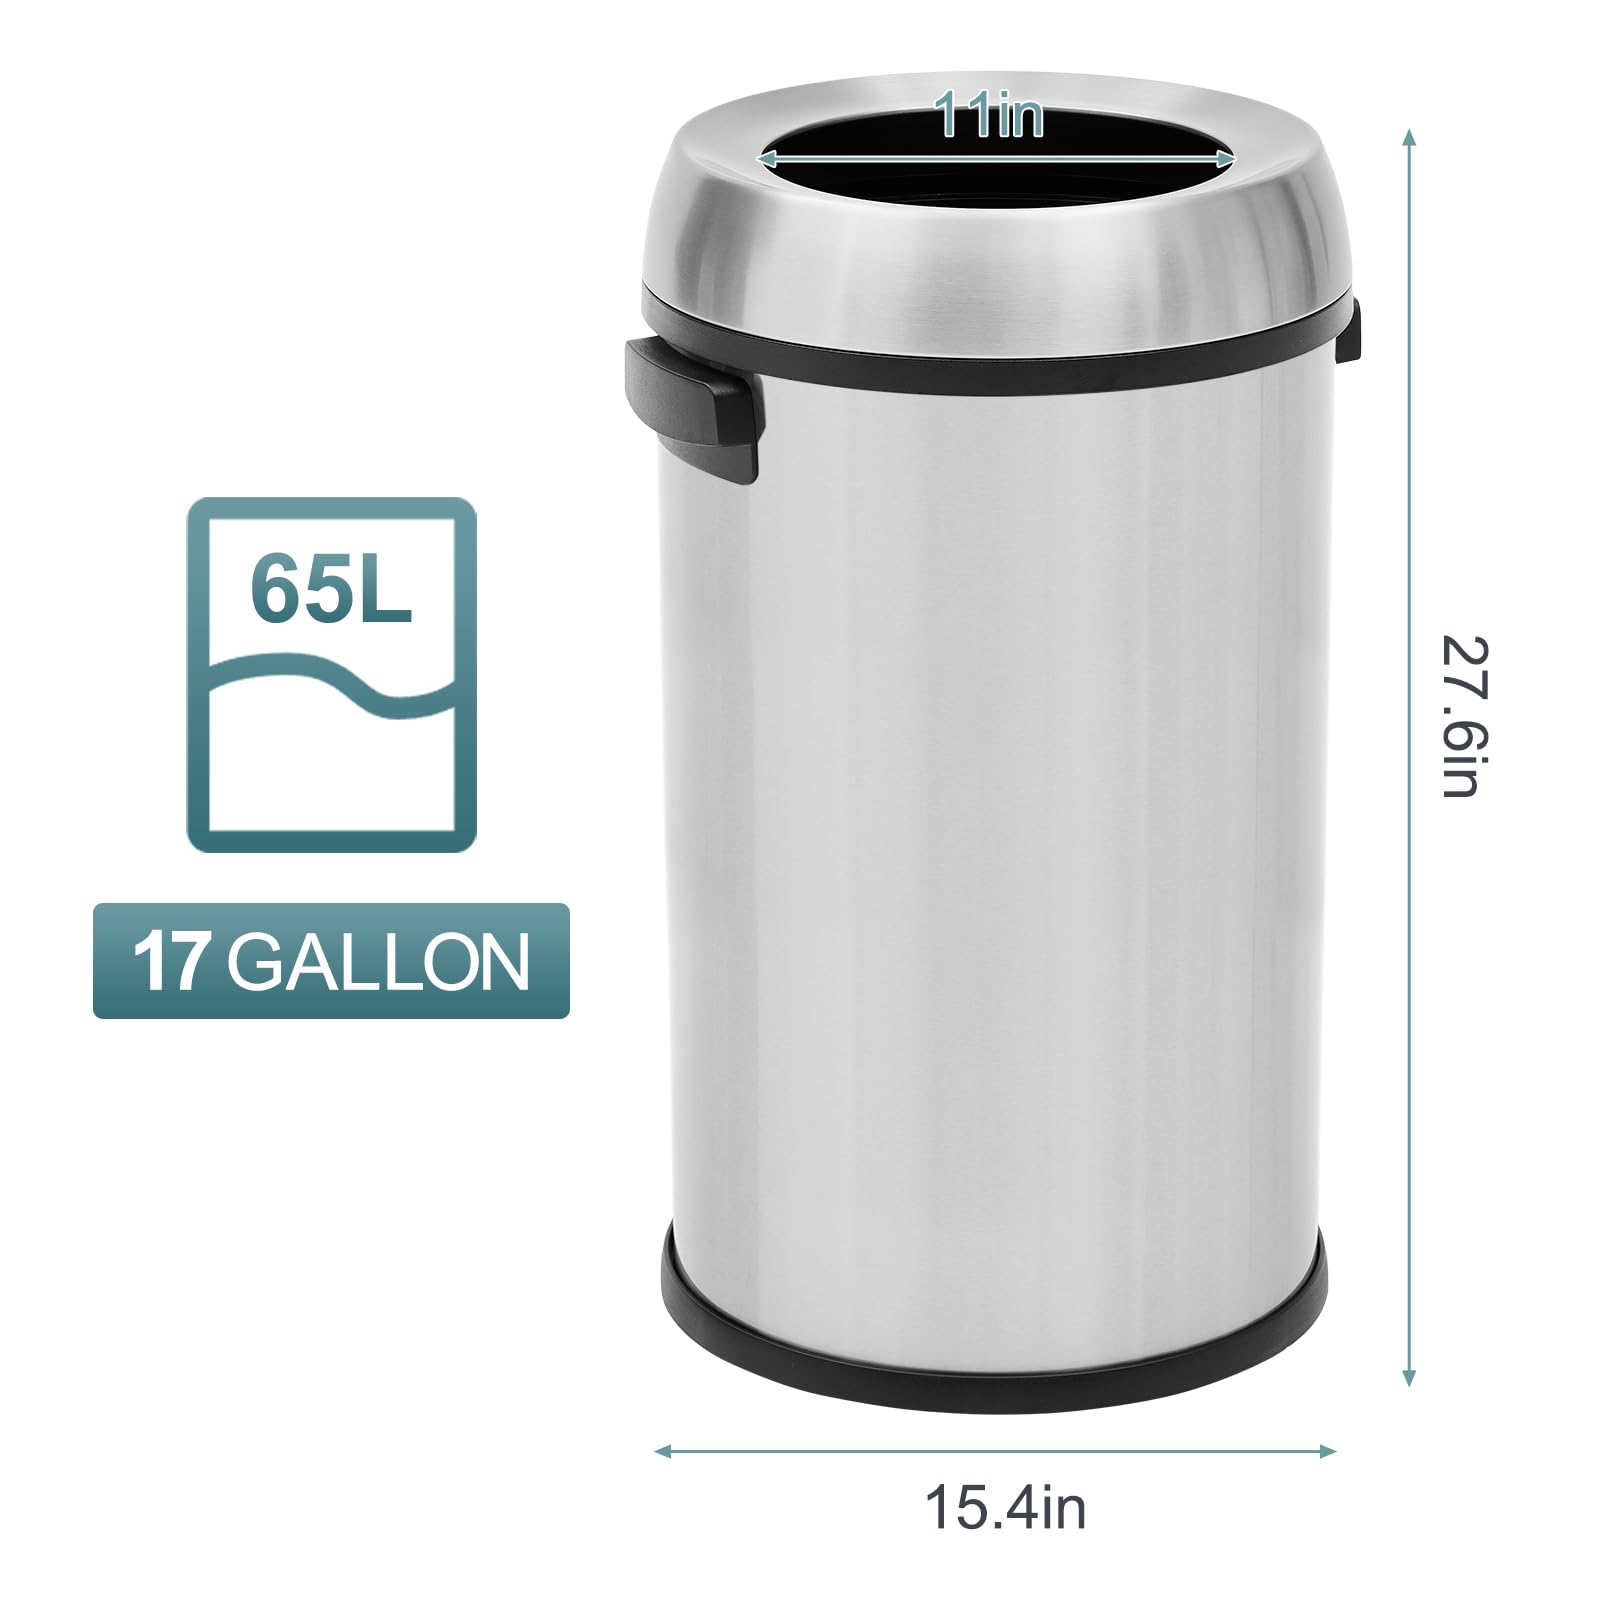 65L/17Gal Trash Can with Swing Top, Commercial Grade Heavy Duty Brushed Stainless Steel Outdoor Trash Can, Large Kitchen Trash Can, Round